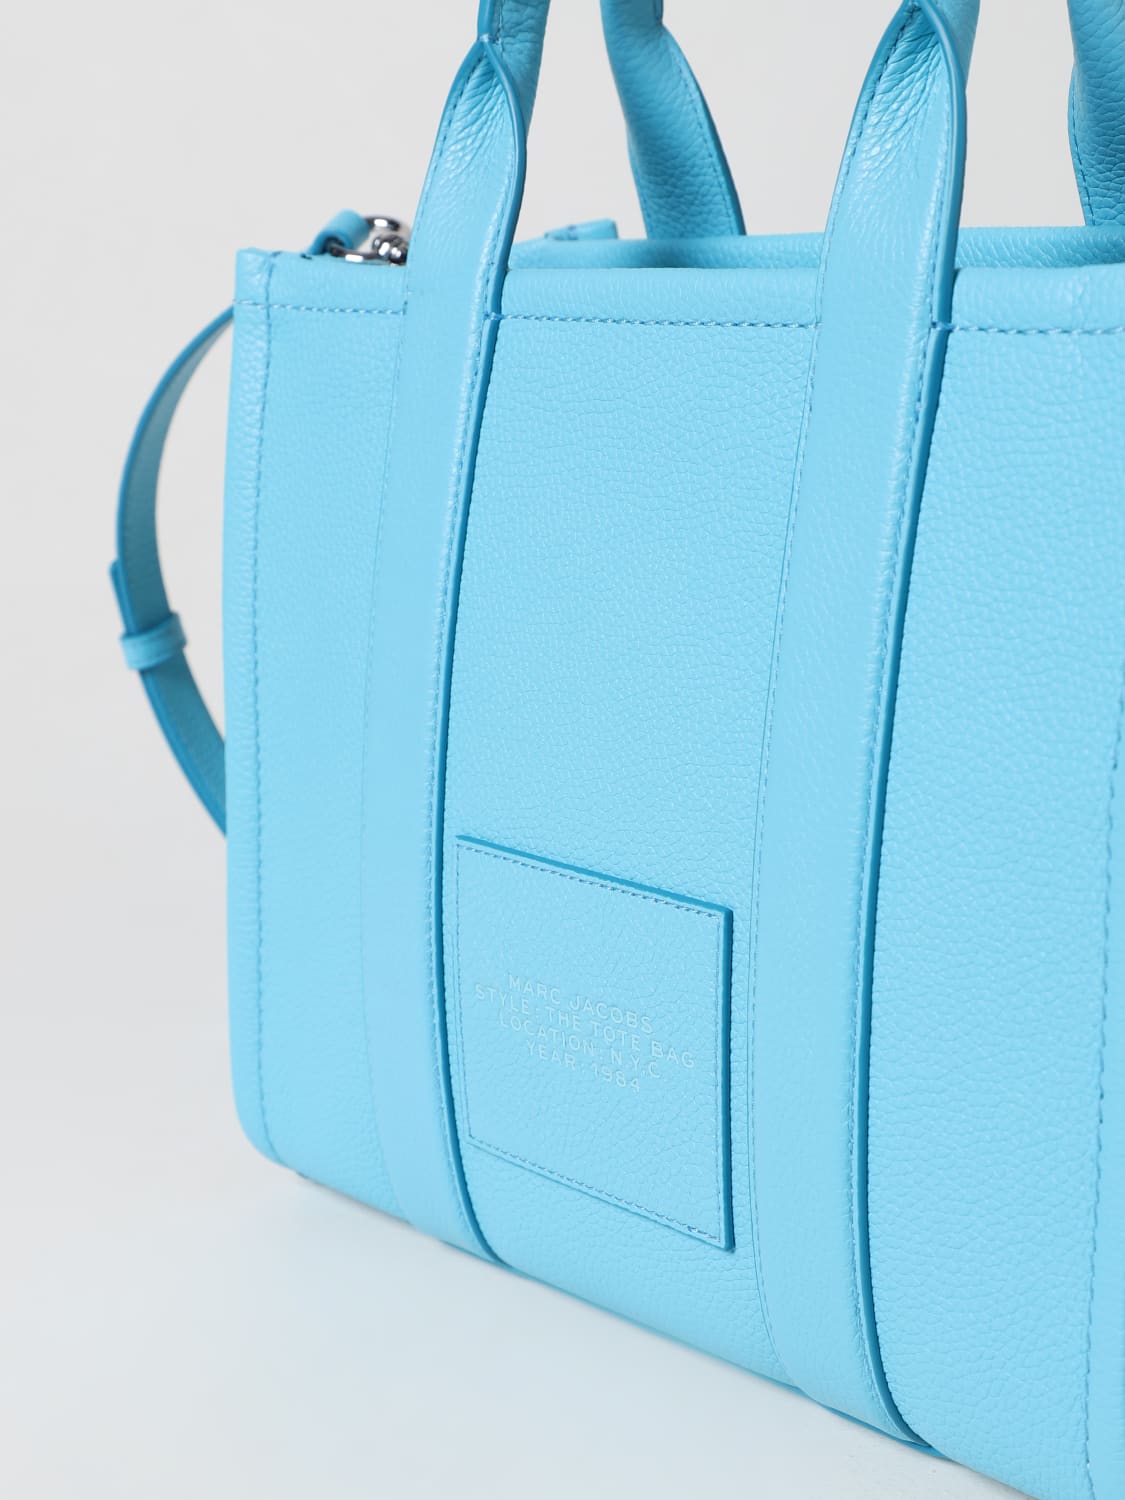 Marc Jacobs blue The Marc Jacobs Small The Tote Bag | Harrods UK